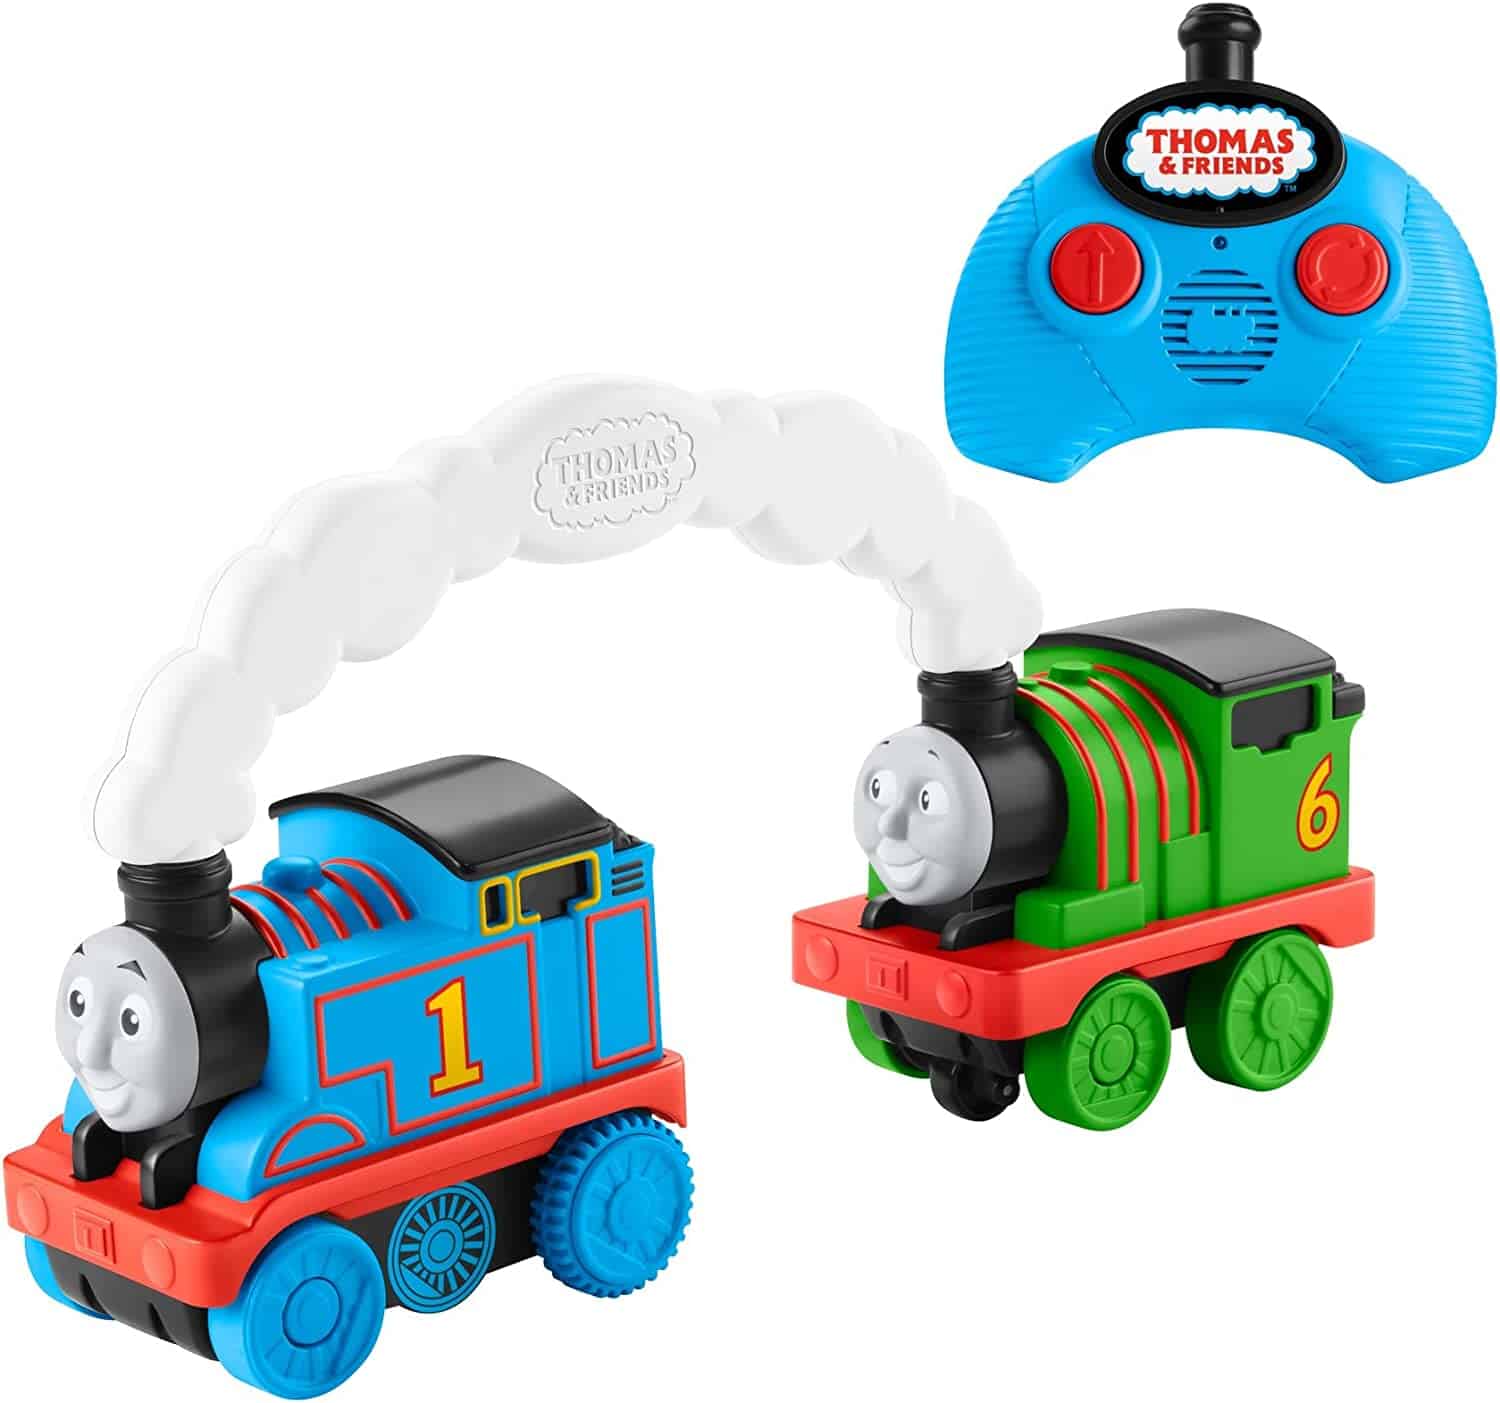 Thomas & Friends Toy Train Engines ONLY $17 (Reg $36)￼